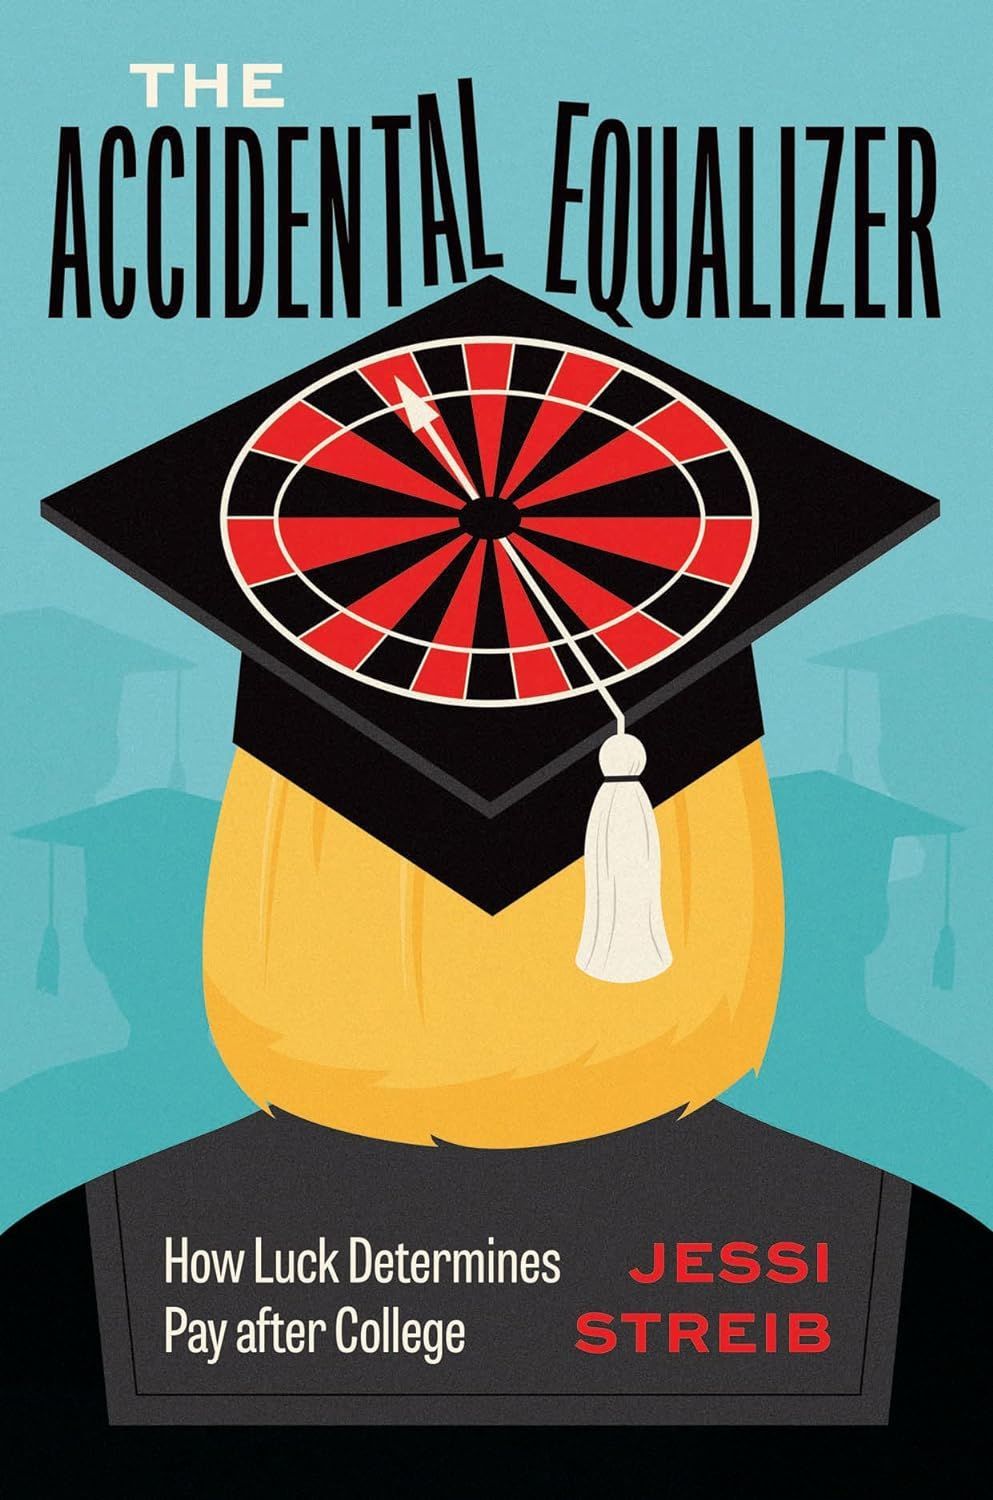 For Luck or Merit: On Jessi Streib’s “The Accidental Equalizer”